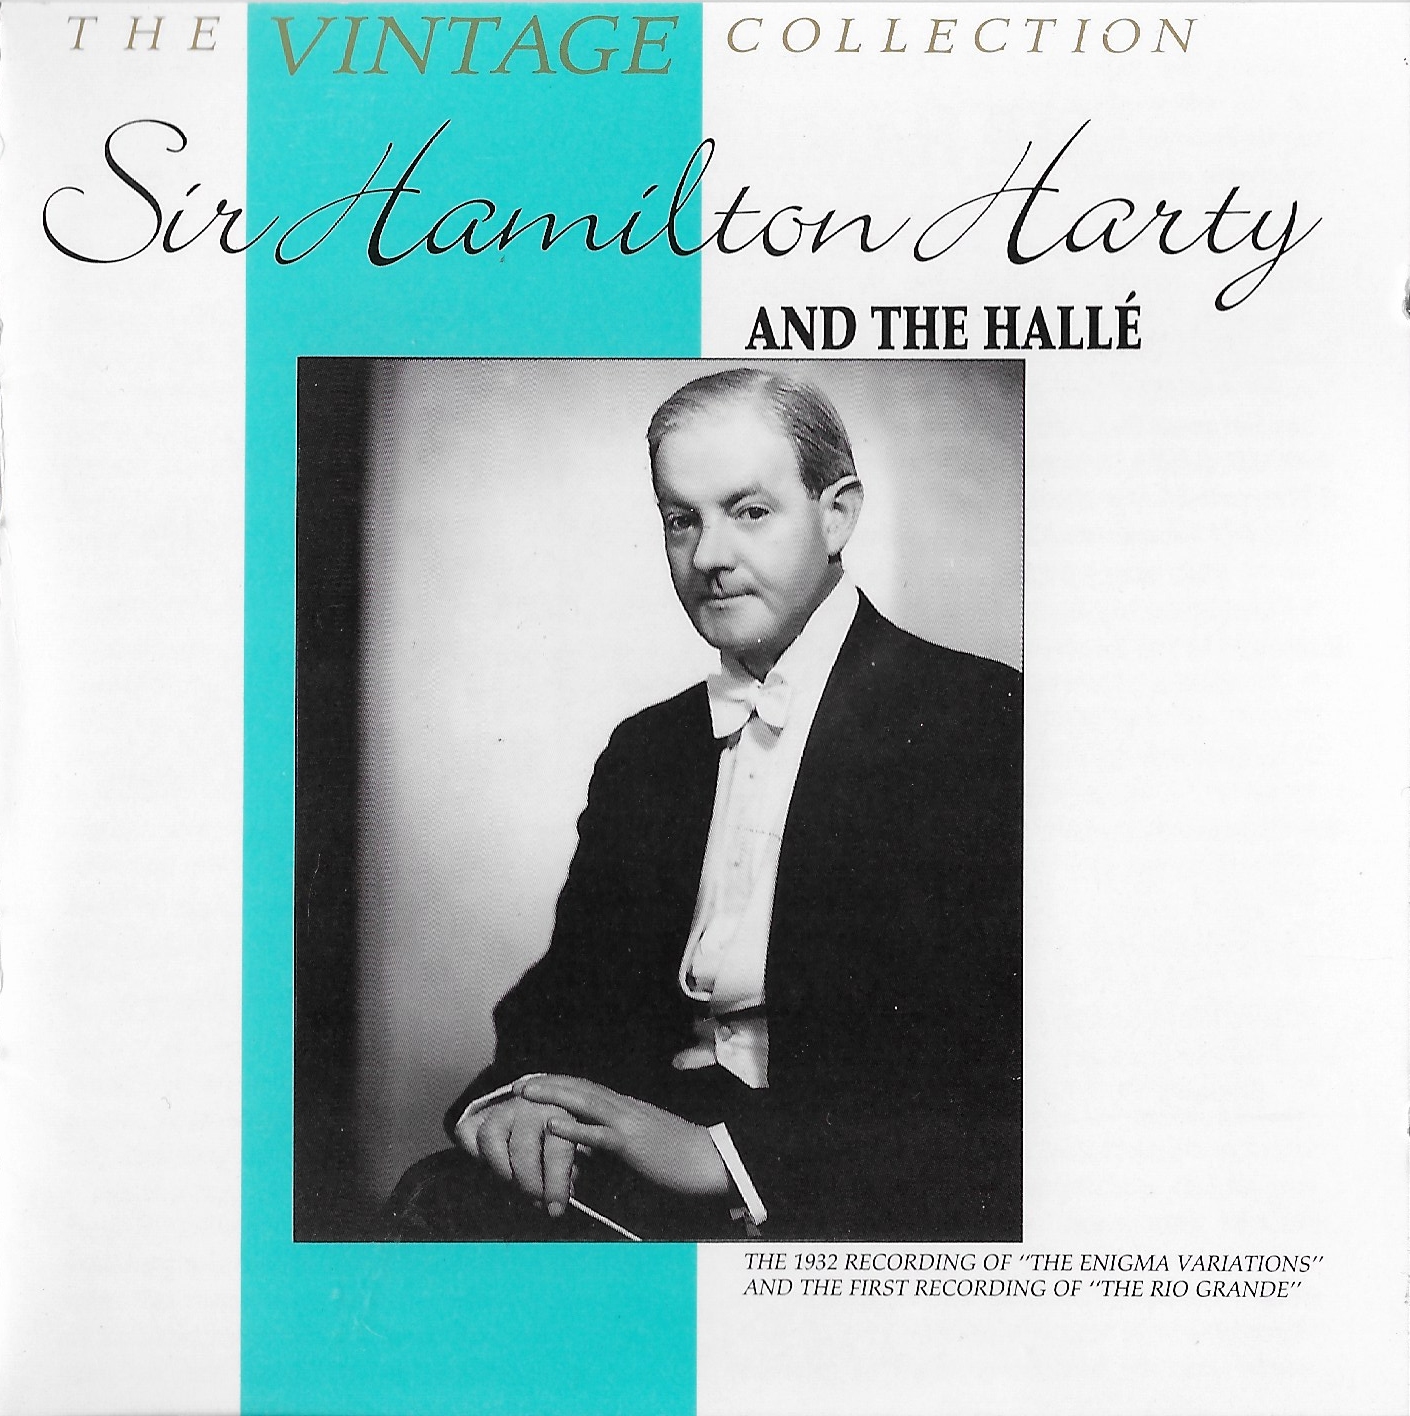 Picture of The vintage collection - Hamilton Harty and The Halle by artist Hamilton Harty from the BBC cds - Records and Tapes library